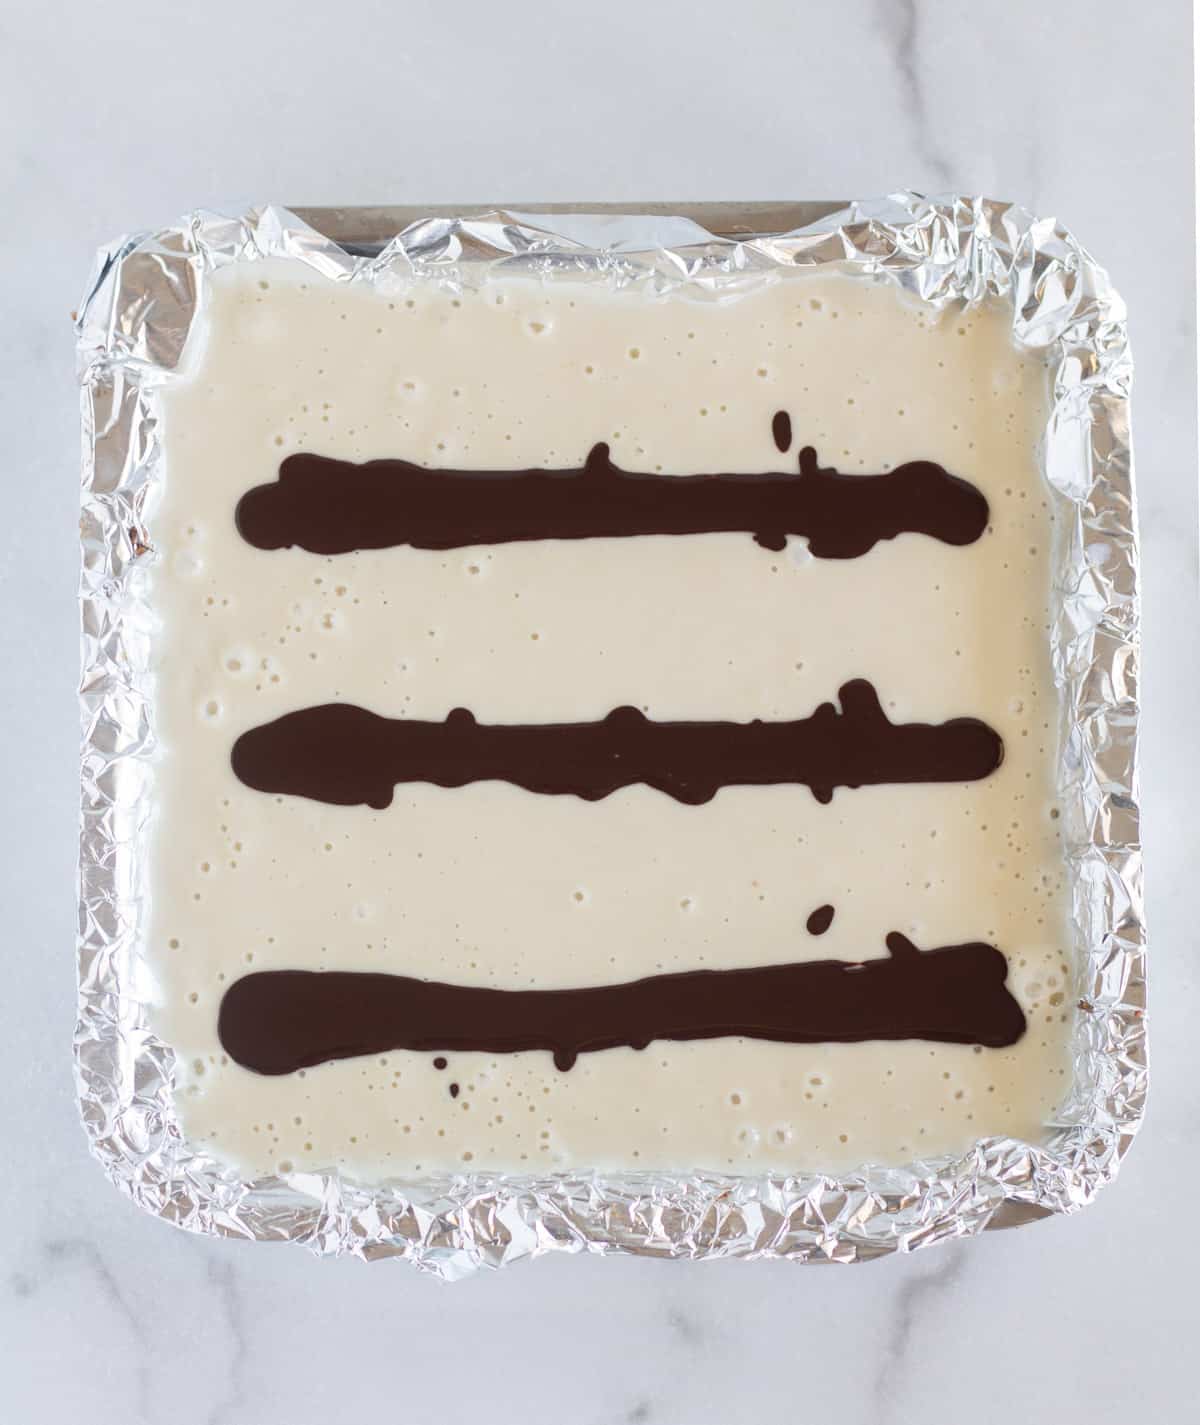 3 lines of chocolate drizzled on top of the cheesecake.